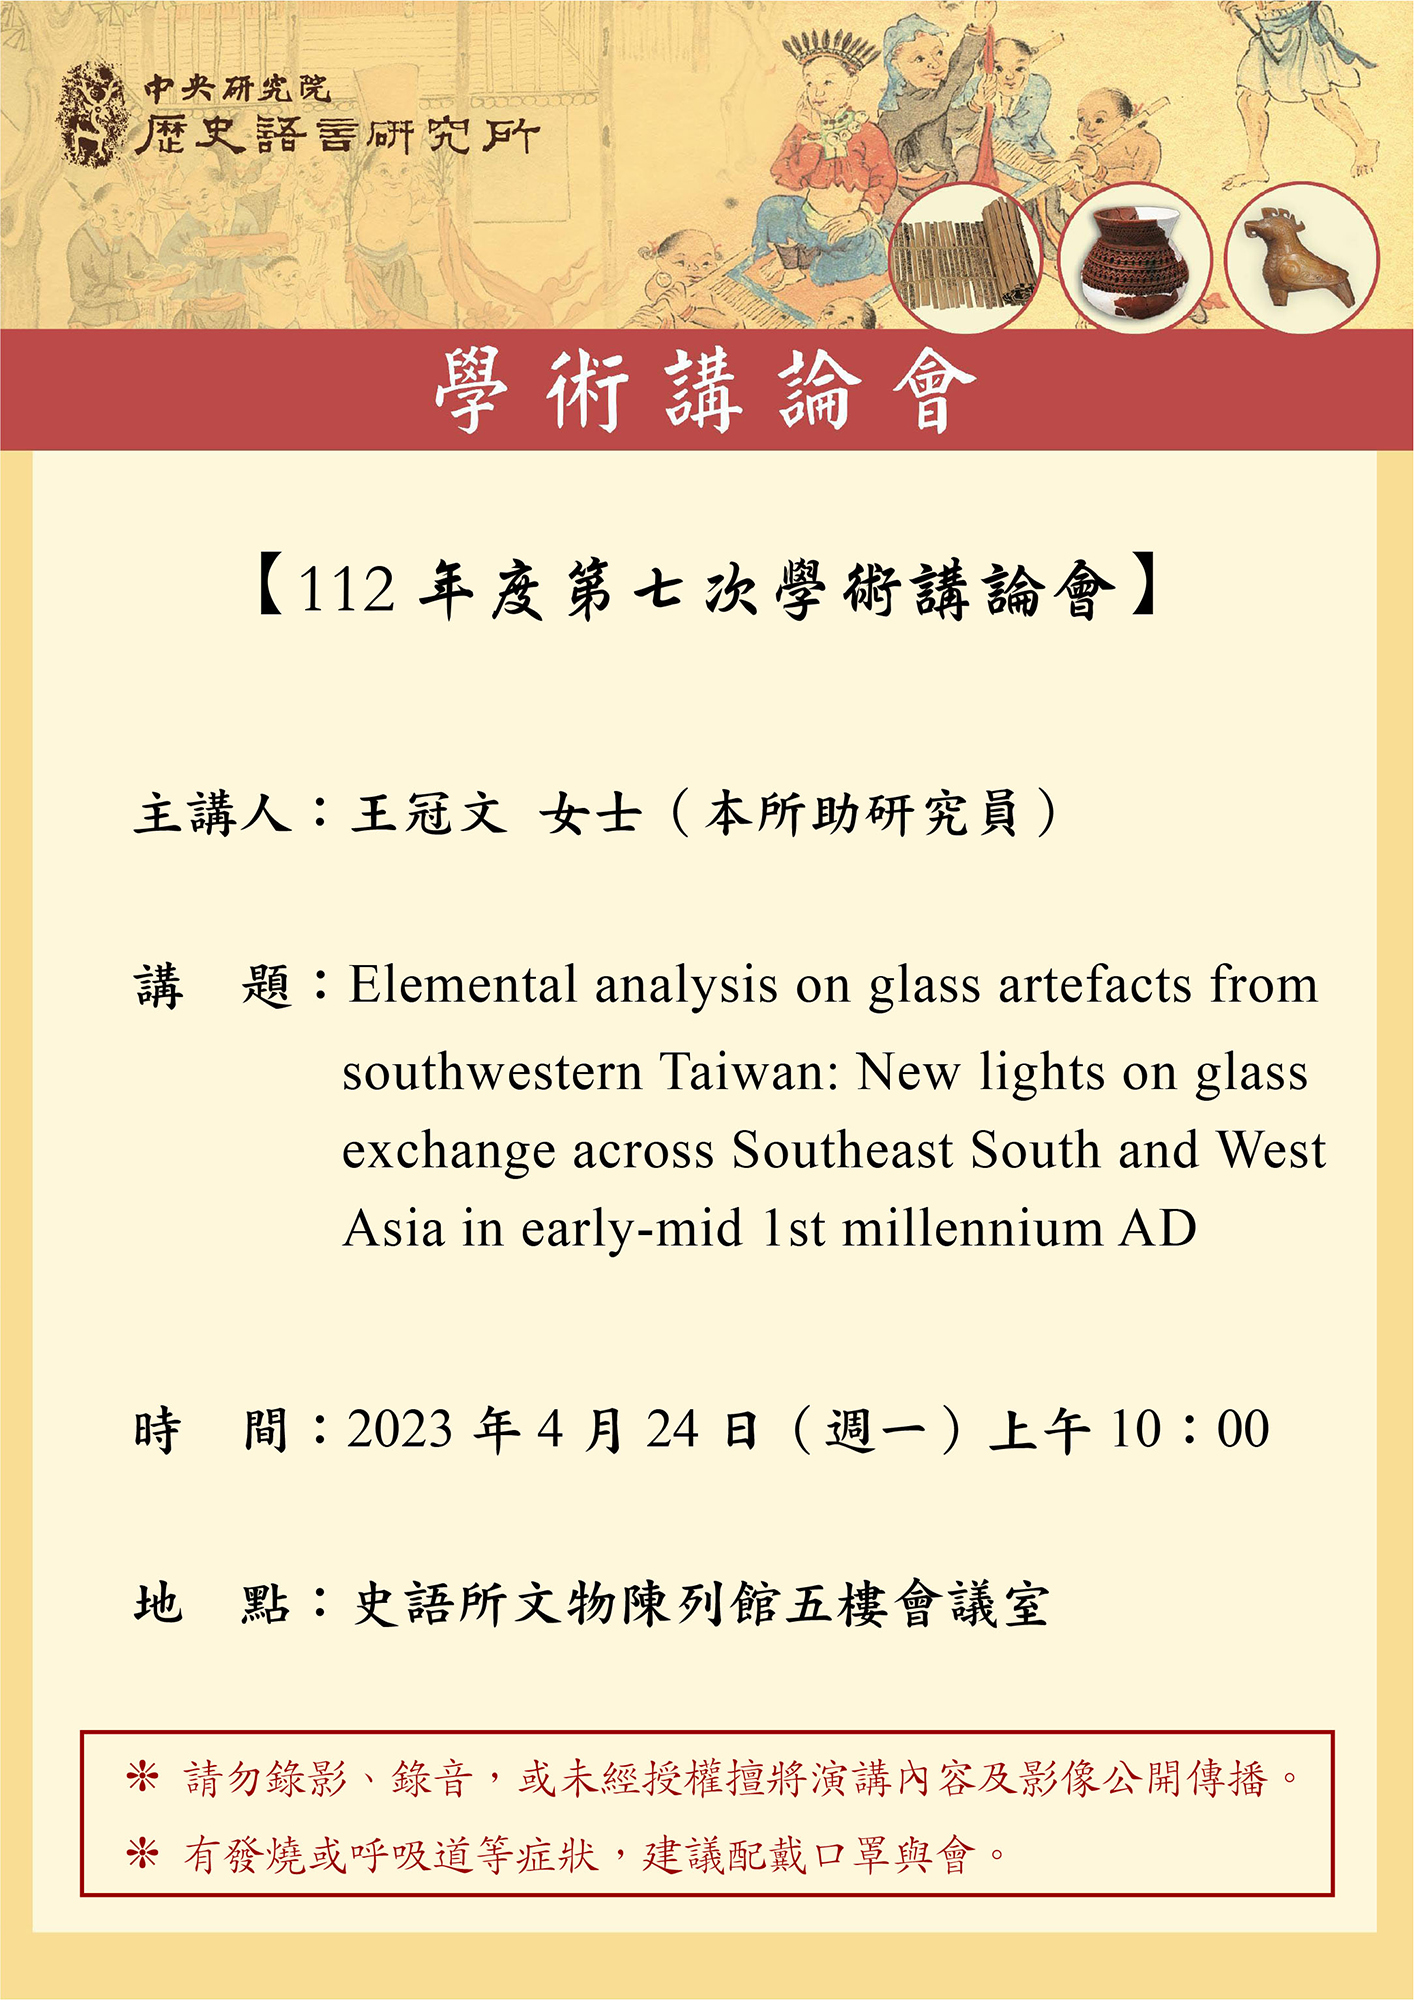 Elemental analysis on glass artefacts from southwestern Taiwan: New lights on glass exchange across Southeast South and West Asia in early-mid 1st millennium AD